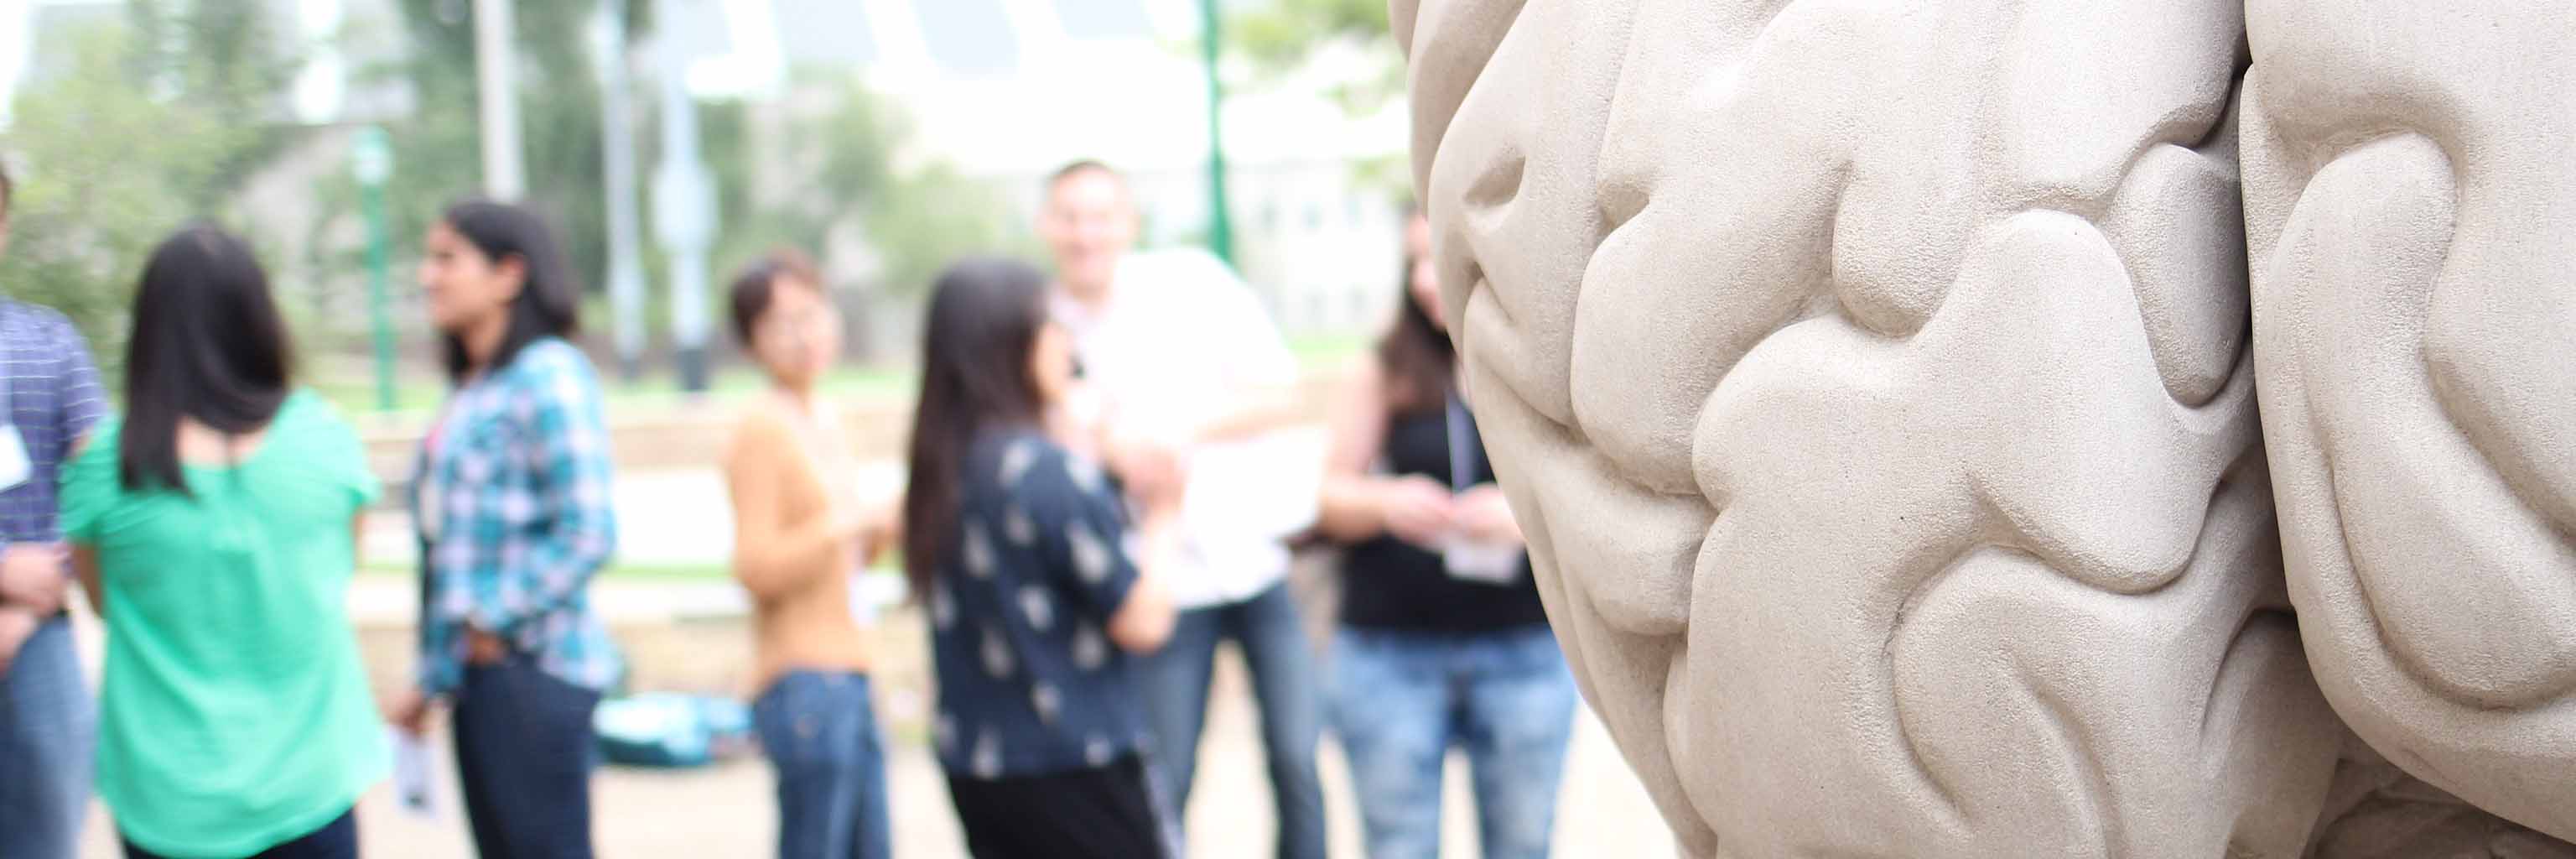 student in a group standing next to human brain statue